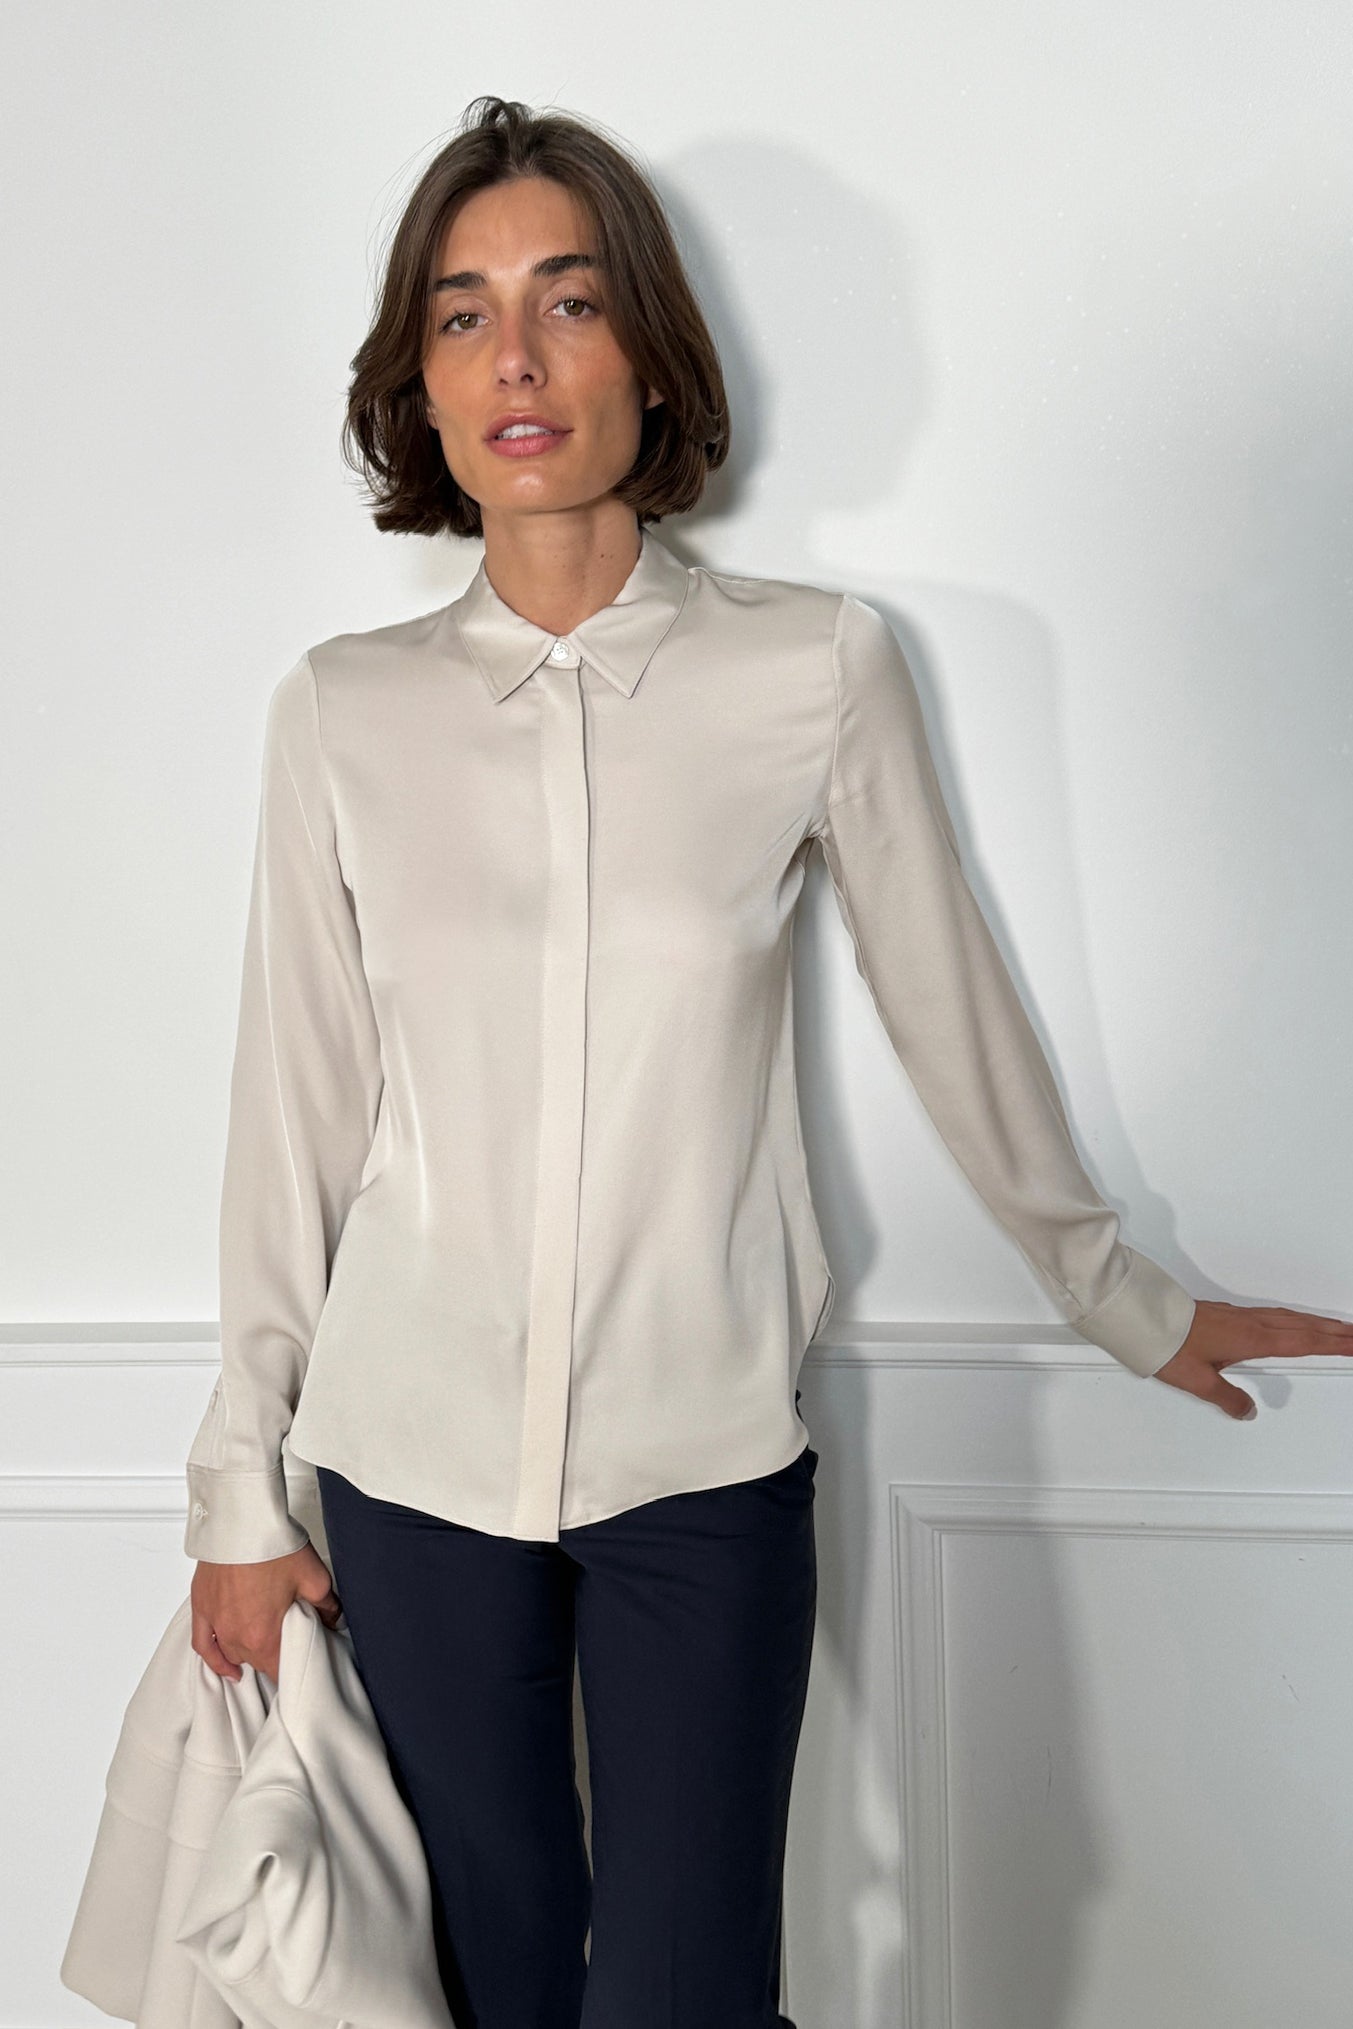 Bluse Classic Fit in PumiceTheory - Anita Hass